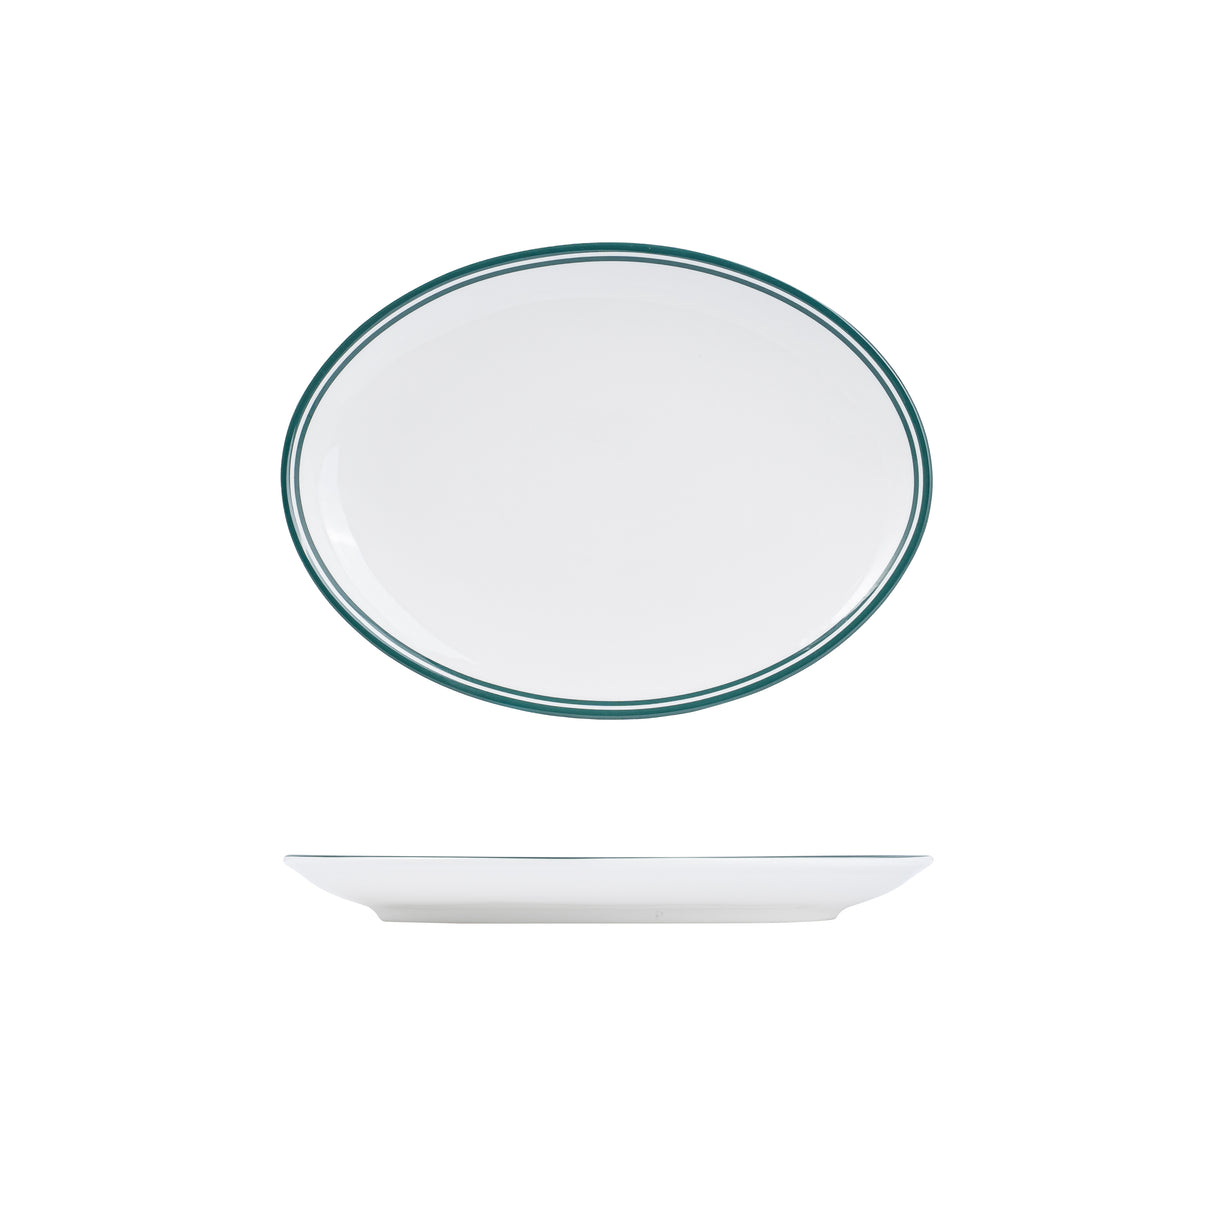 Nano Cru Oval Coupe Plate Green 260 X 190mm: Pack of 12